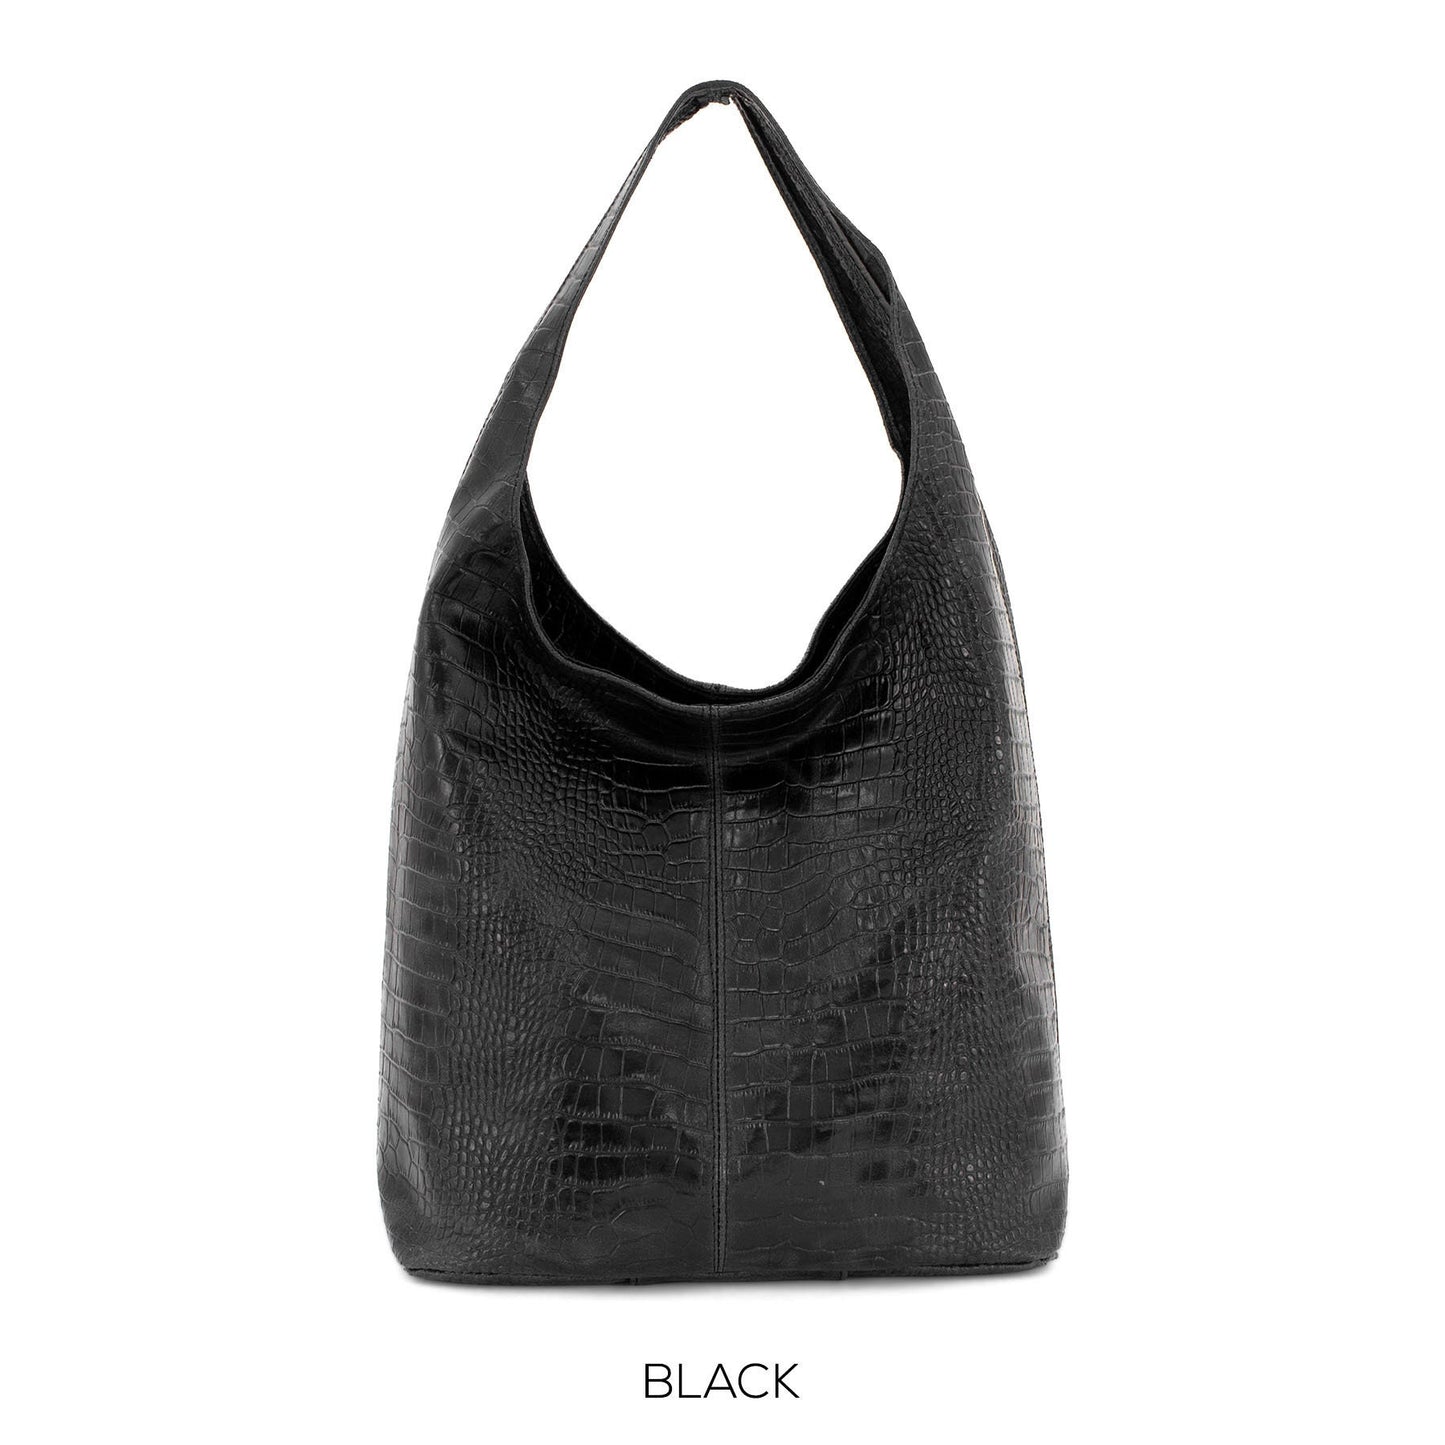 Genuine Leather Croc Effect Large Tote Bag